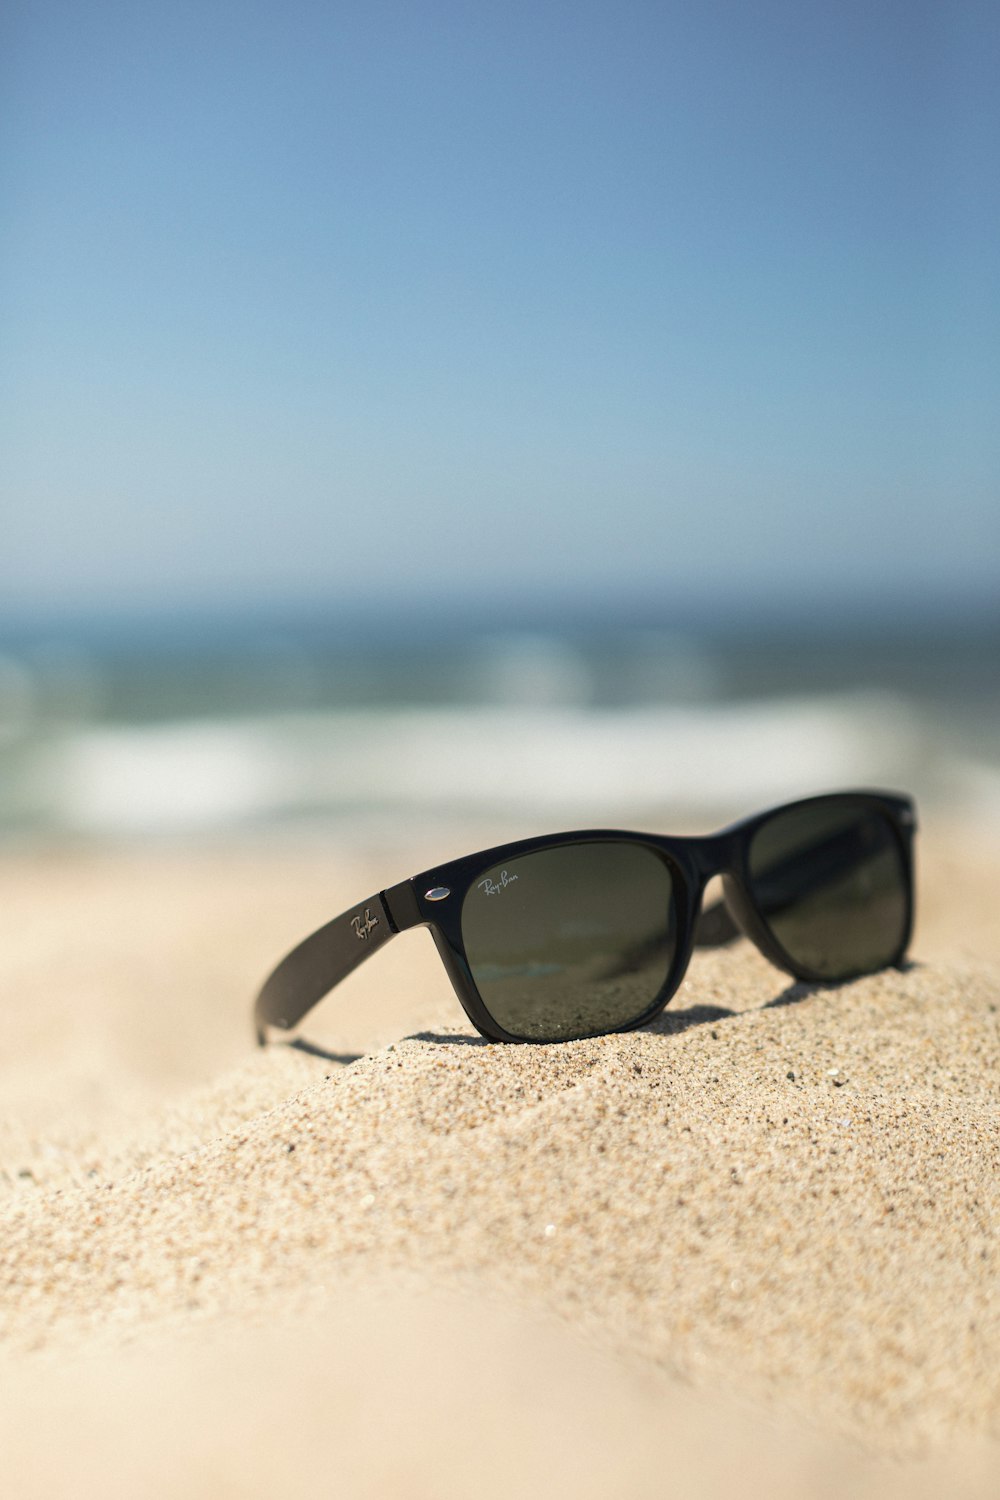 Sunglasses Beach Pictures  Download Free Images on Unsplash